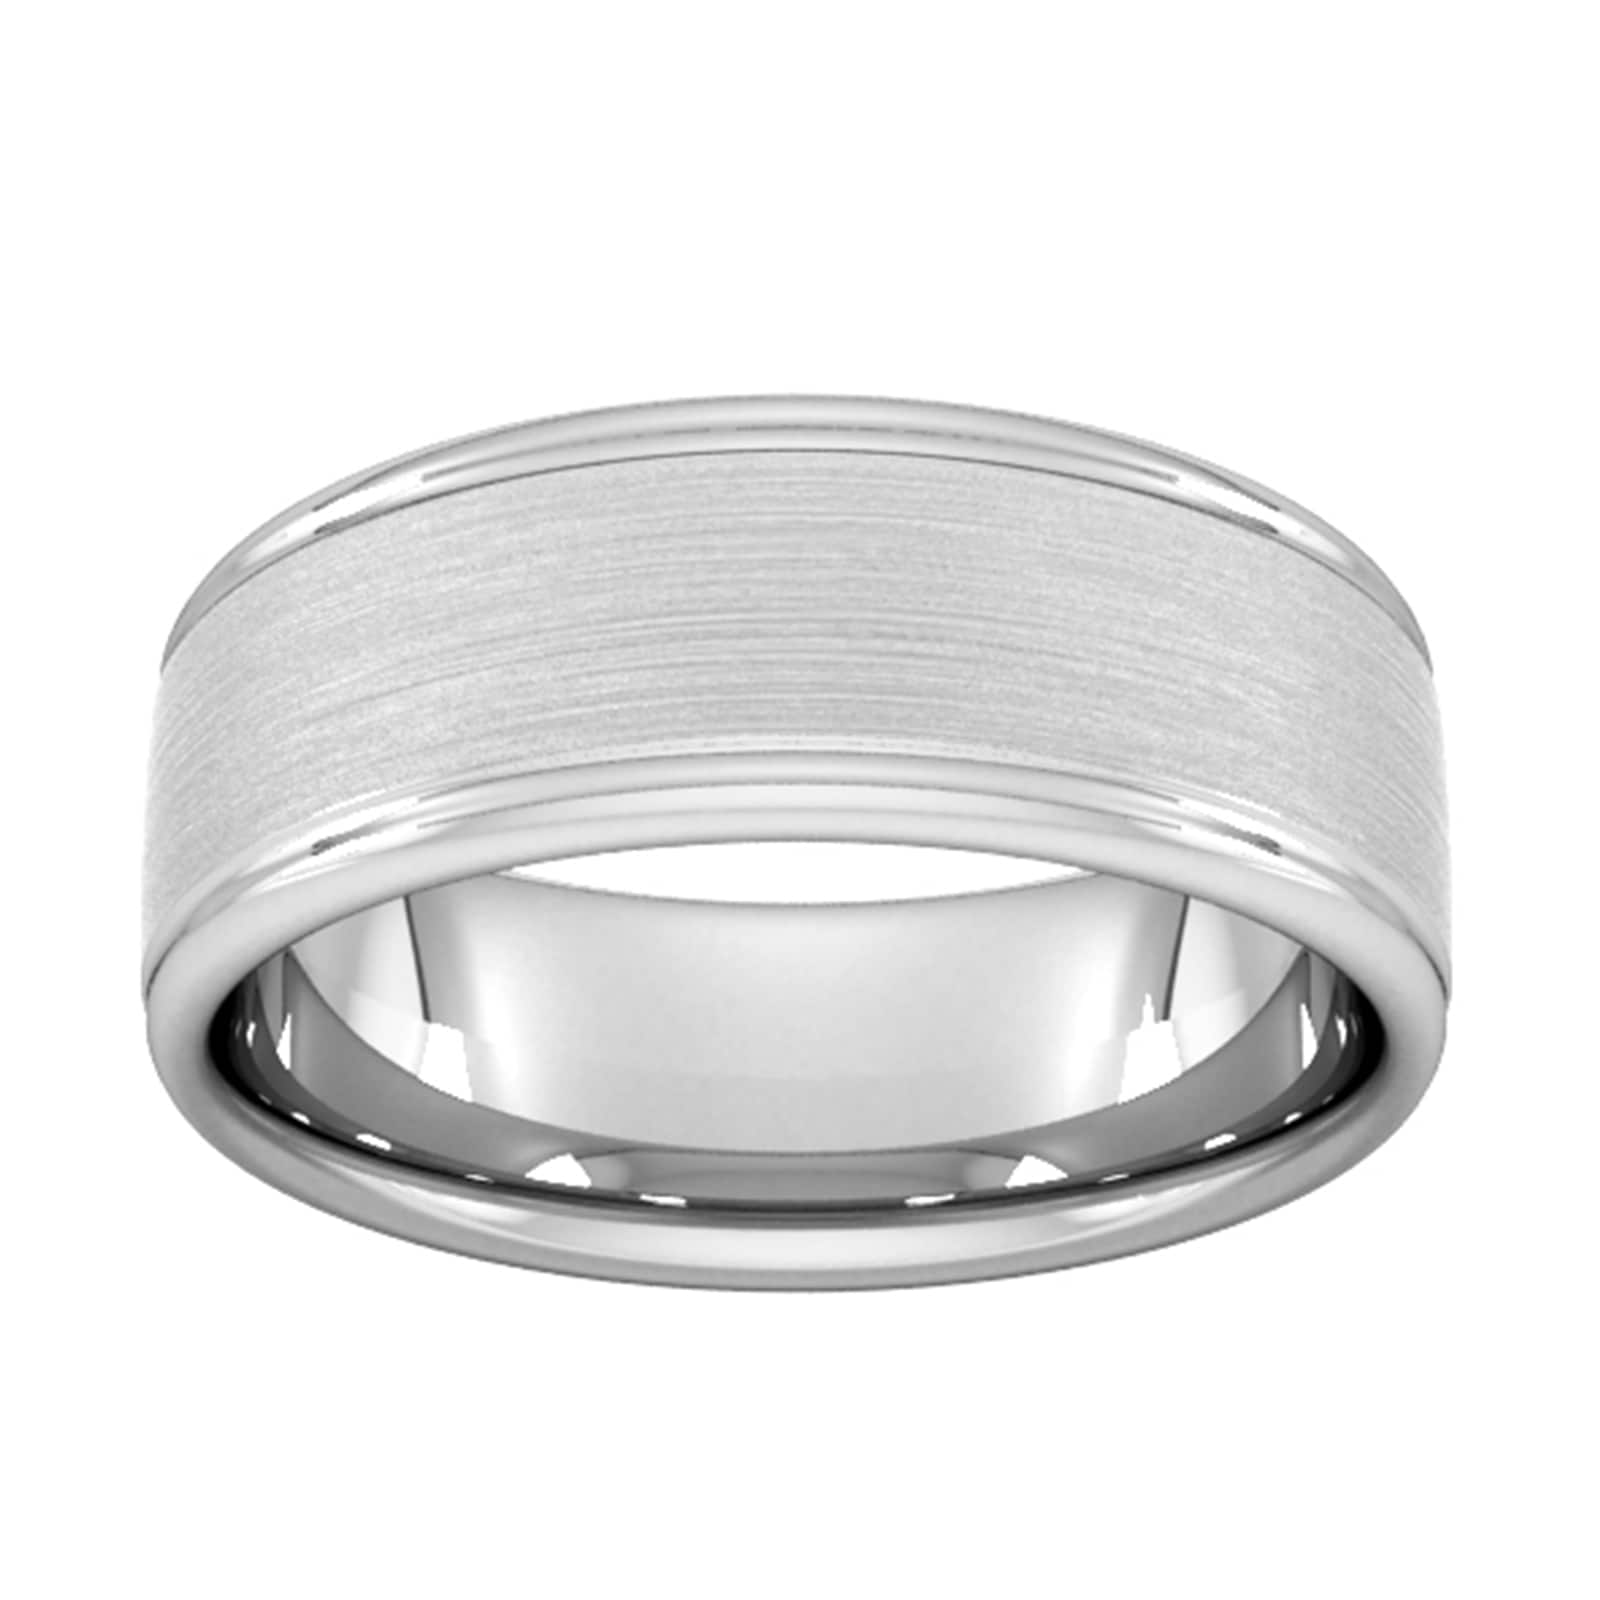 8mm Traditional Court Standard Matt Centre With Grooves Wedding Ring In Platinum - Ring Size L